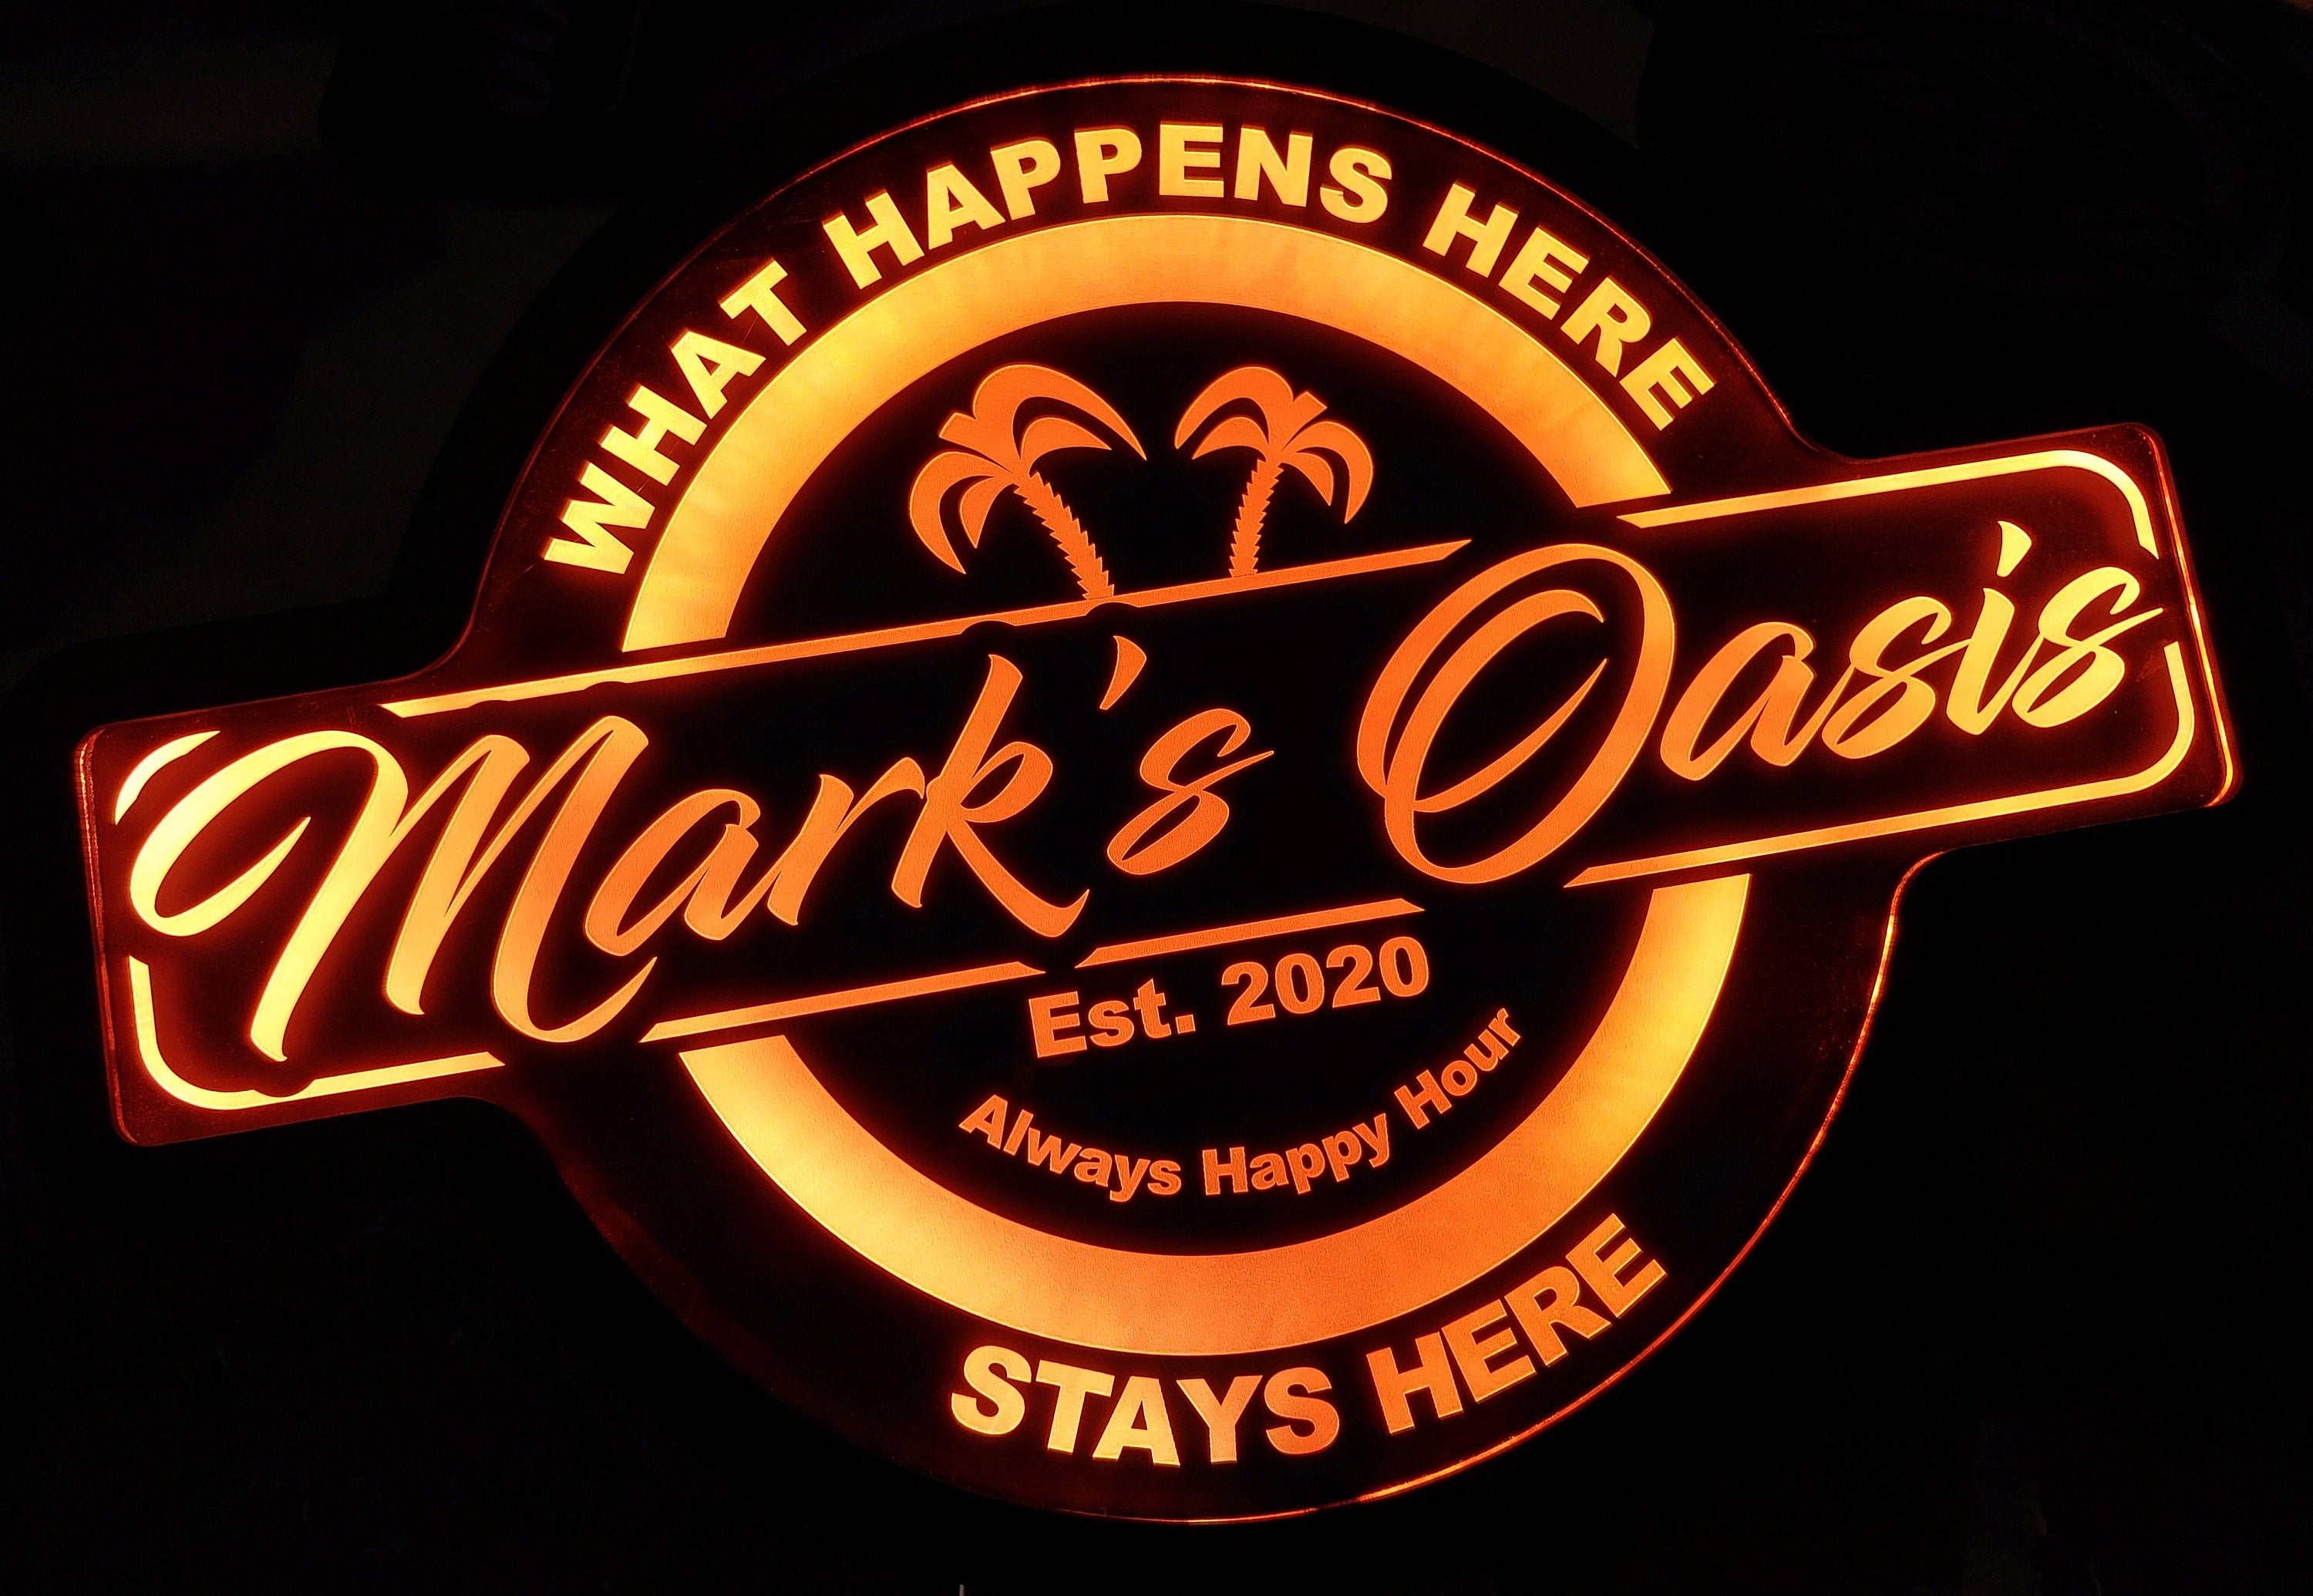 Custom Oasis Lounge or Bar Led Wall Sign Neon Like - Color Changing Remote Control - 4 Sizes Free Shipping